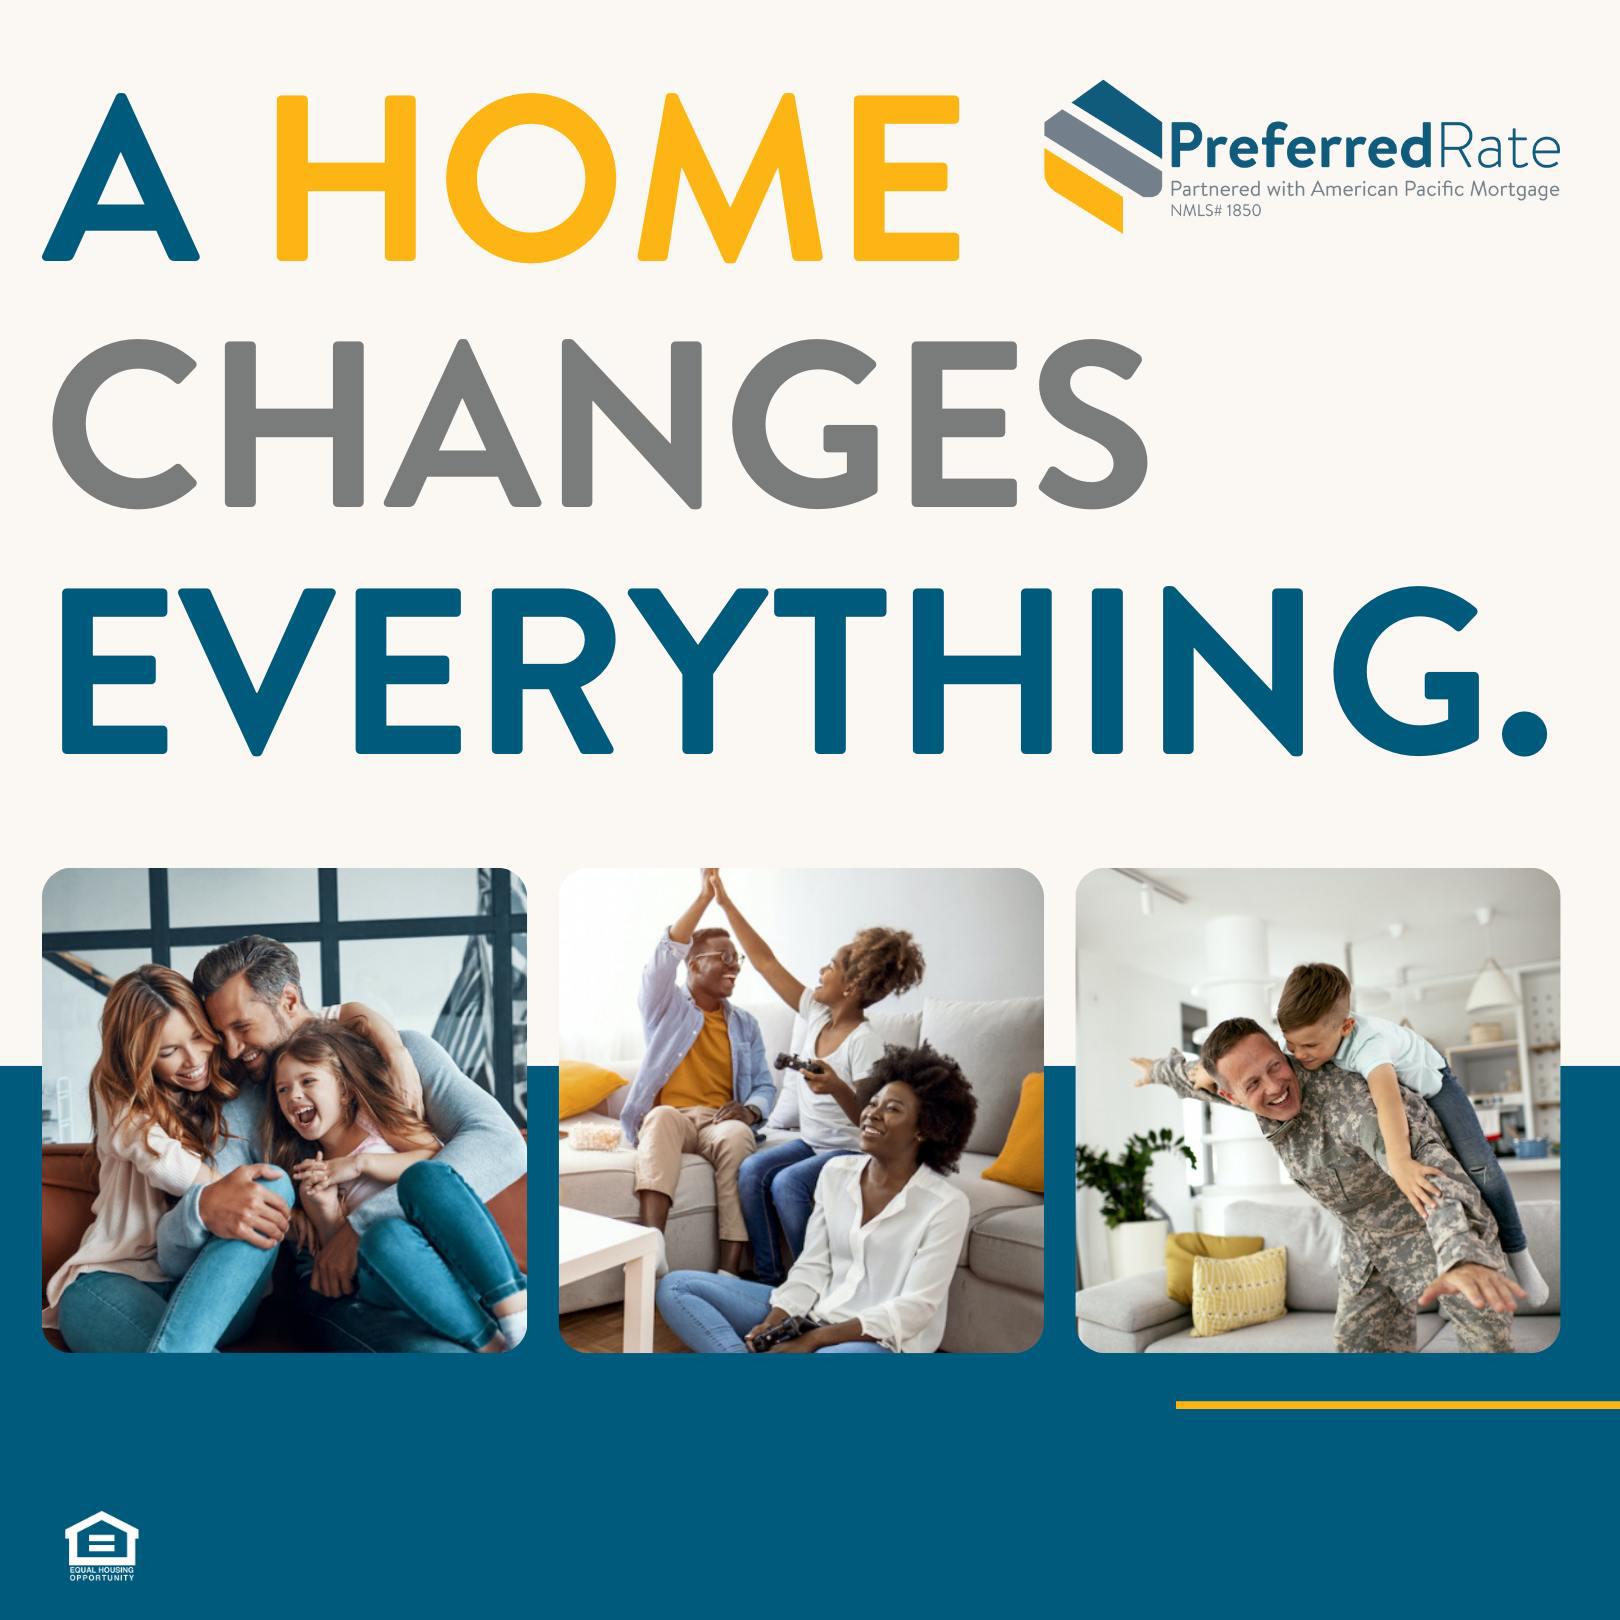 Buying a home is a big deal. Whether you’re a first-time homebuyer or shopping for your next home th Loan Officer - 216621 Oakbrook Terrace (630)673-6735